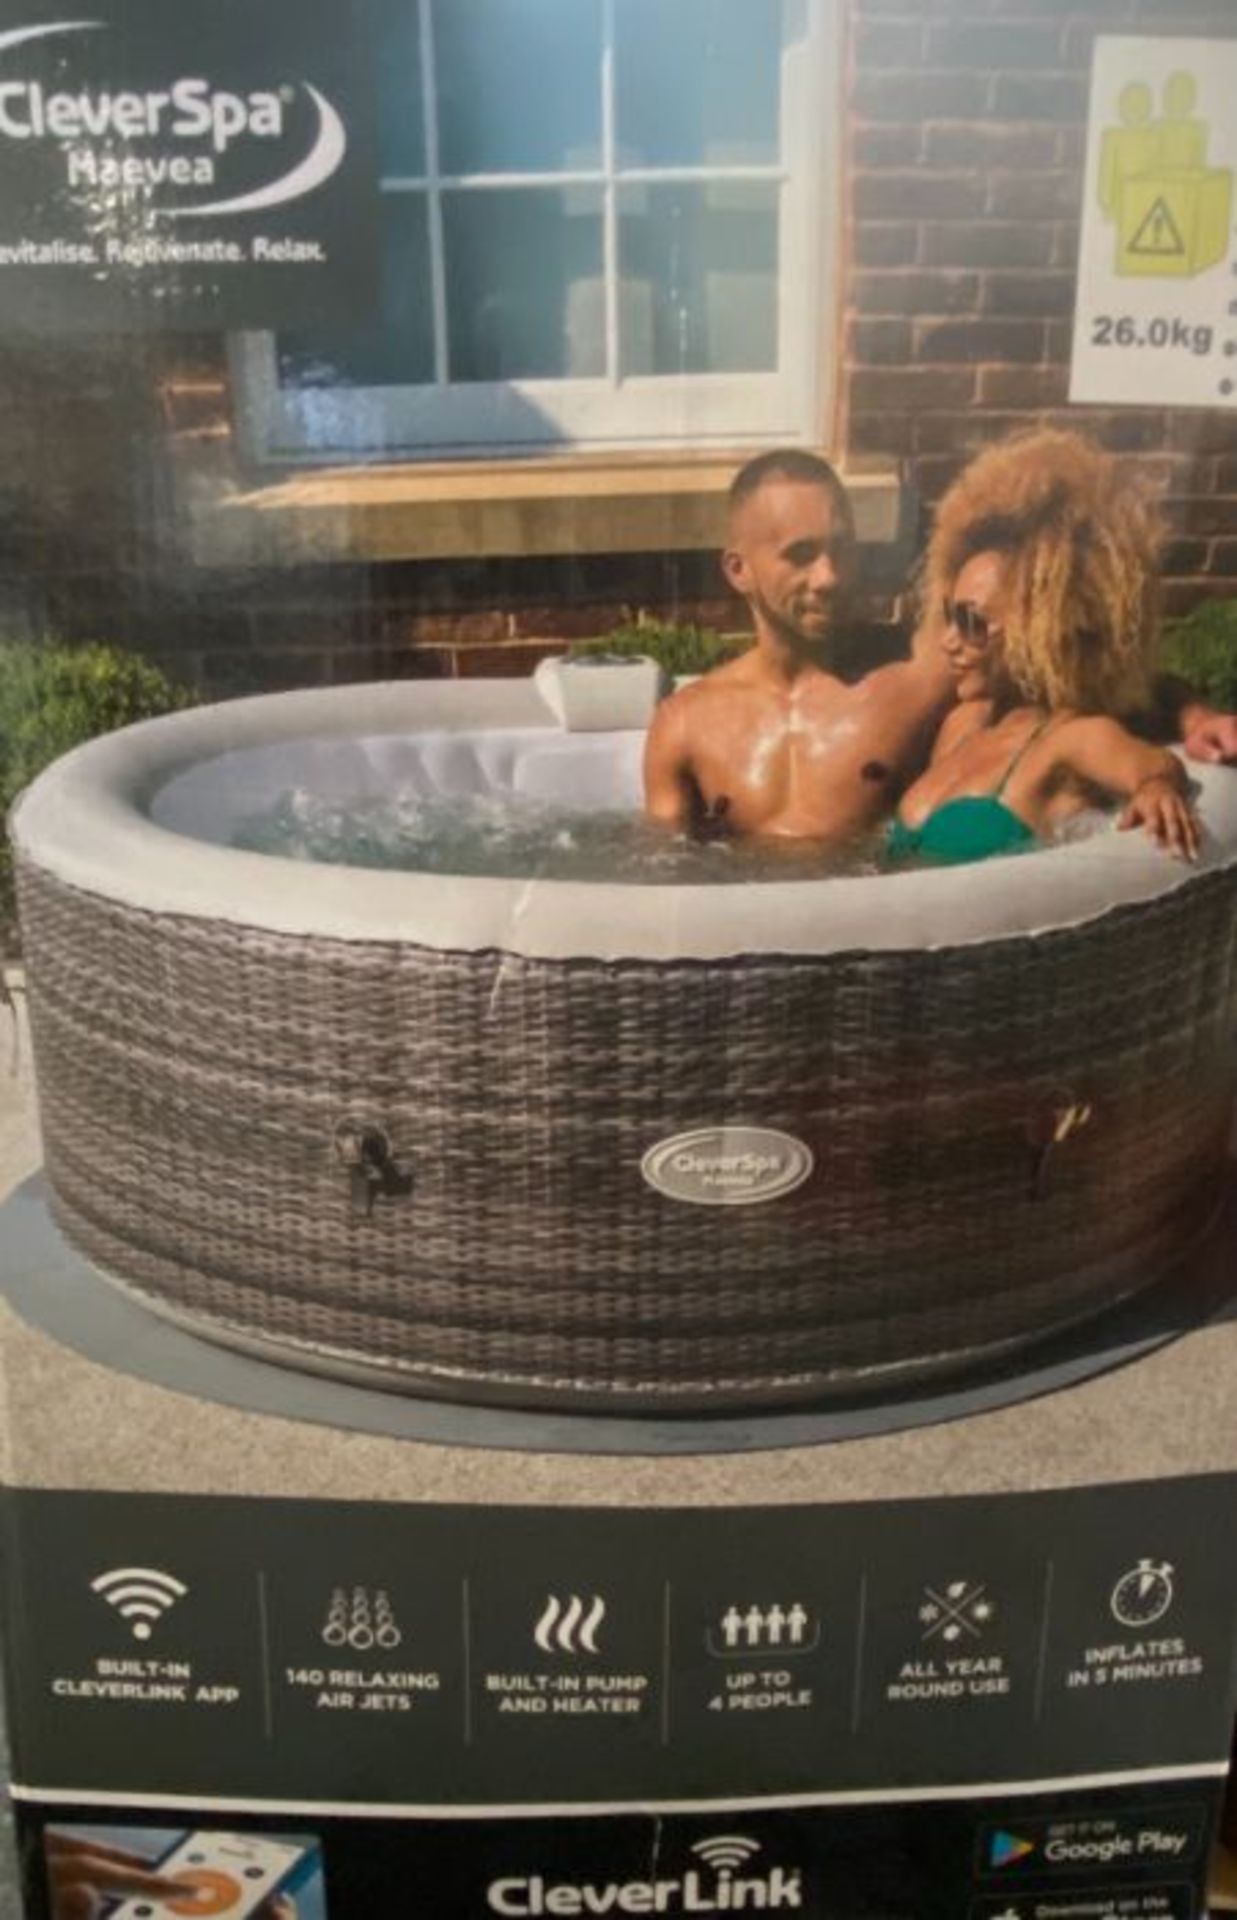 1 x CLEVERSPA MAEVEA 4 PERSON HOT TUB - RRP £443.24 - Image 3 of 3